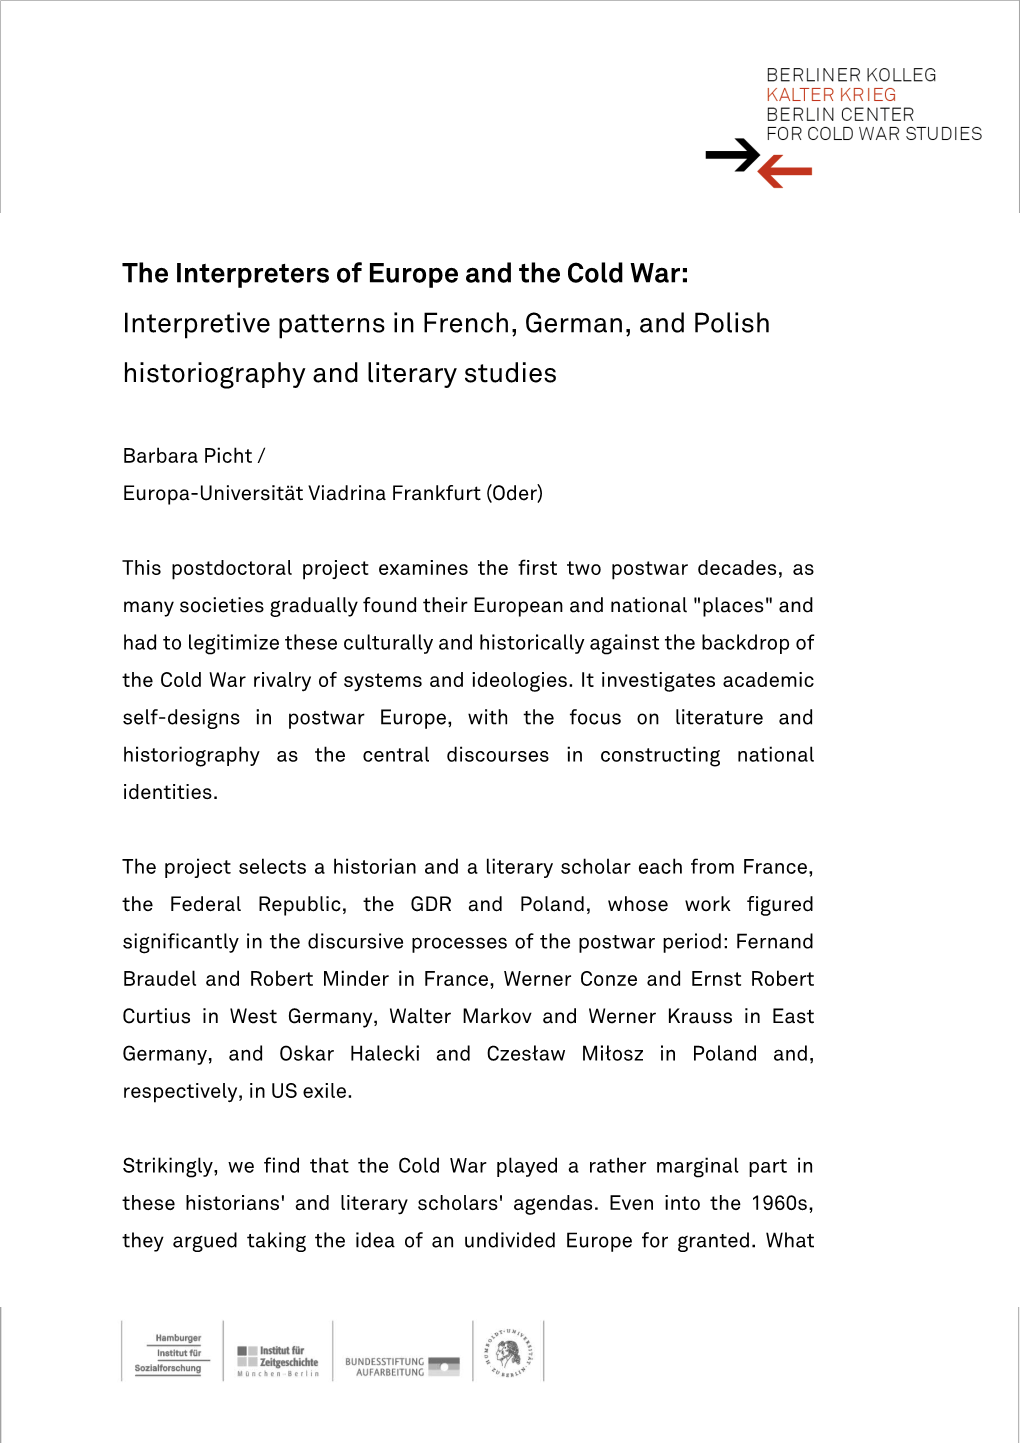 The Interpreters of Europe and the Cold War: Interpretive Patterns in French, German, and Polish Historiography and Literary Studies